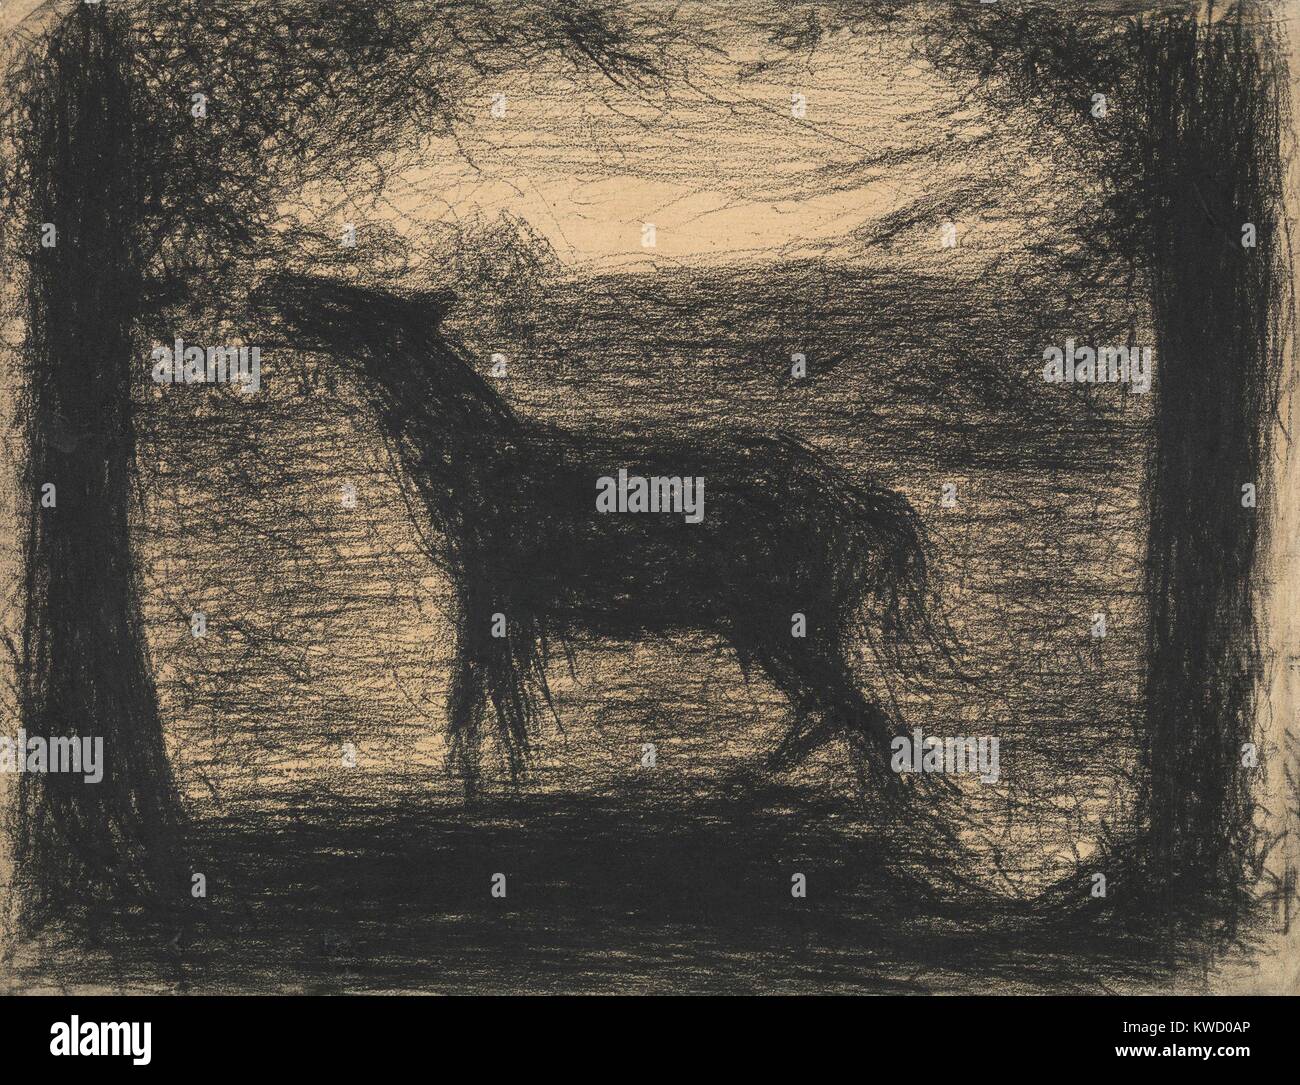 Foal (The Colt), by Georges Seurat, 1882-83, French Post-Impressionist drawing, Conte crayon. Lines create and active surface with an animals and trees silhouette against an generalized landscape (BSLOC_2017_5_86) Stock Photo